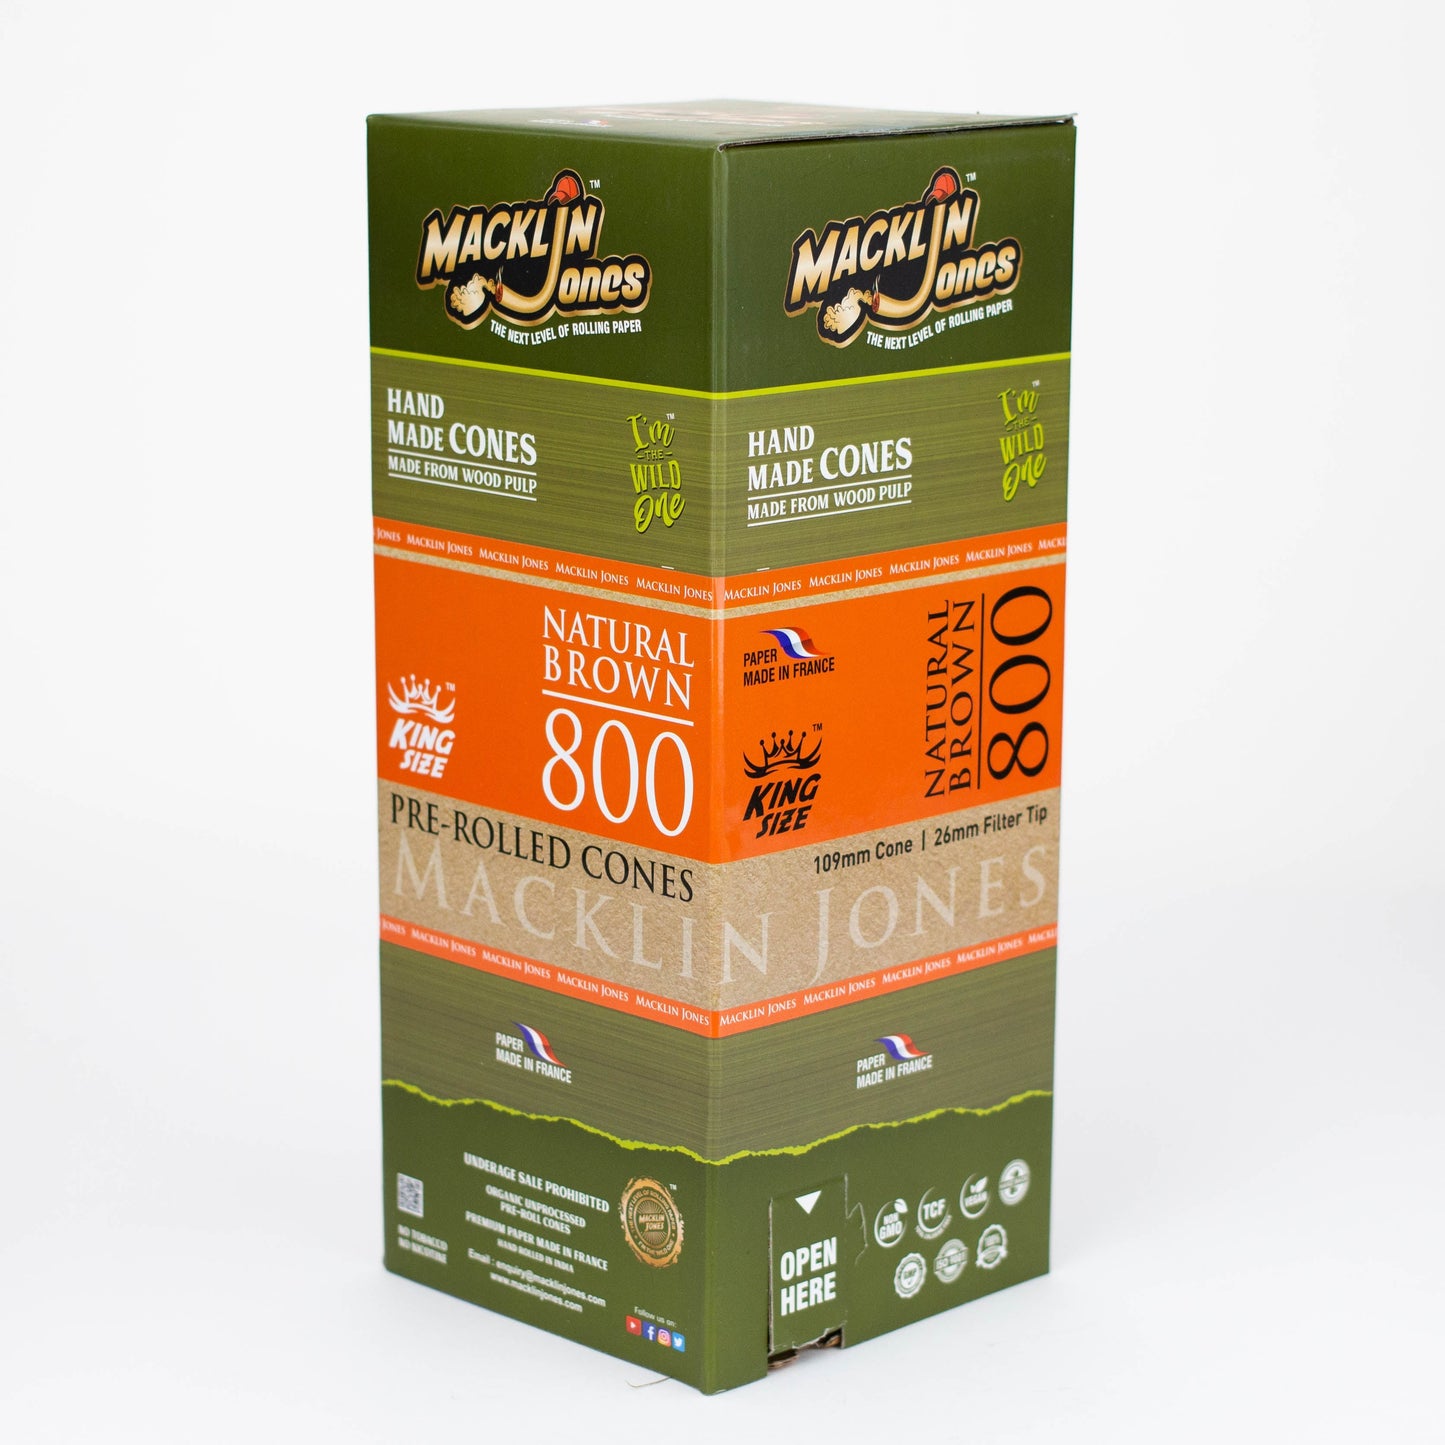 Macklin Jones - Natural Brown King Size Pre-Rolled cones Tower 800_0